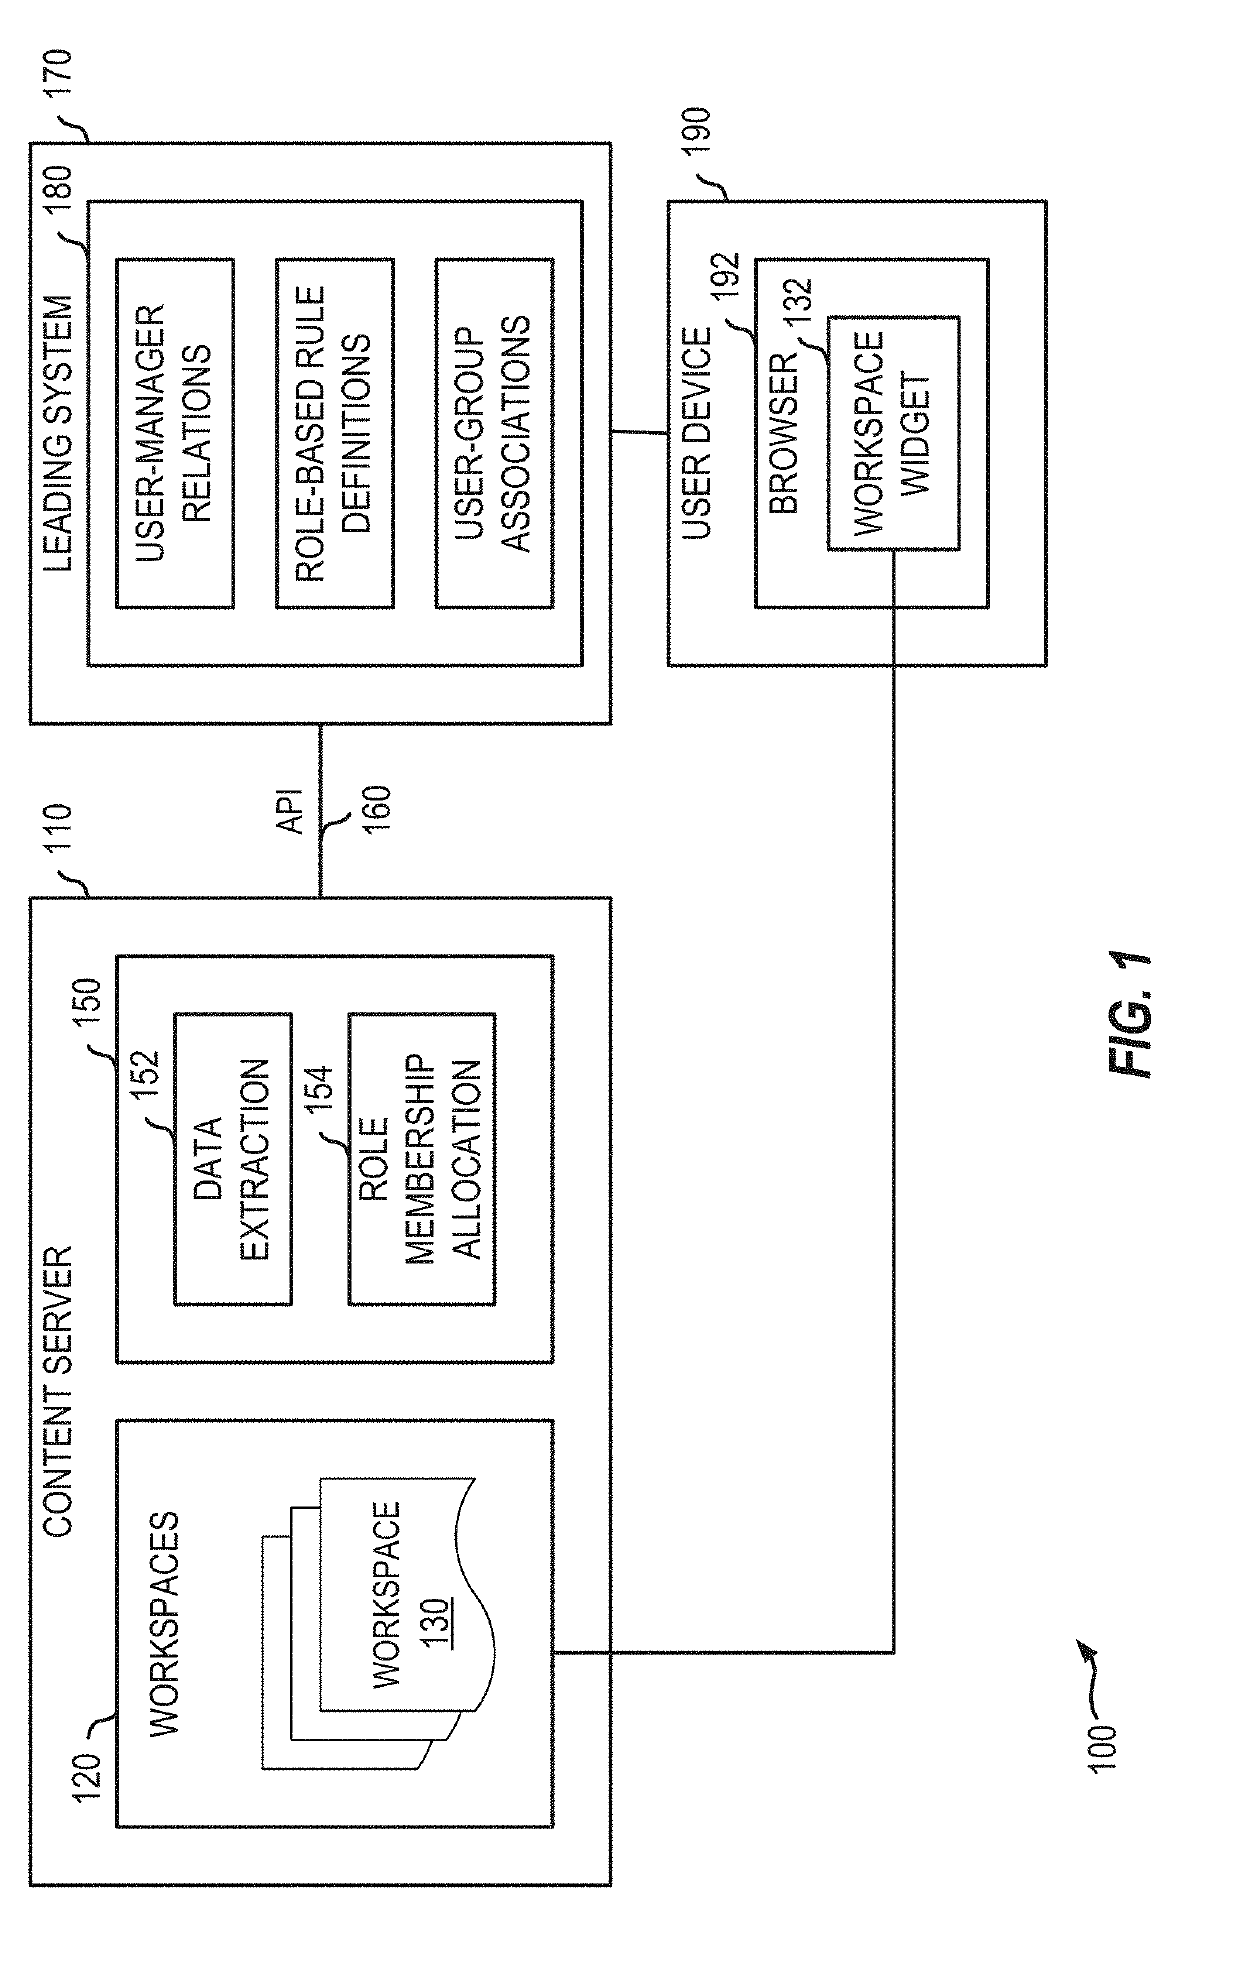 Systems and methods for role-based permission integration